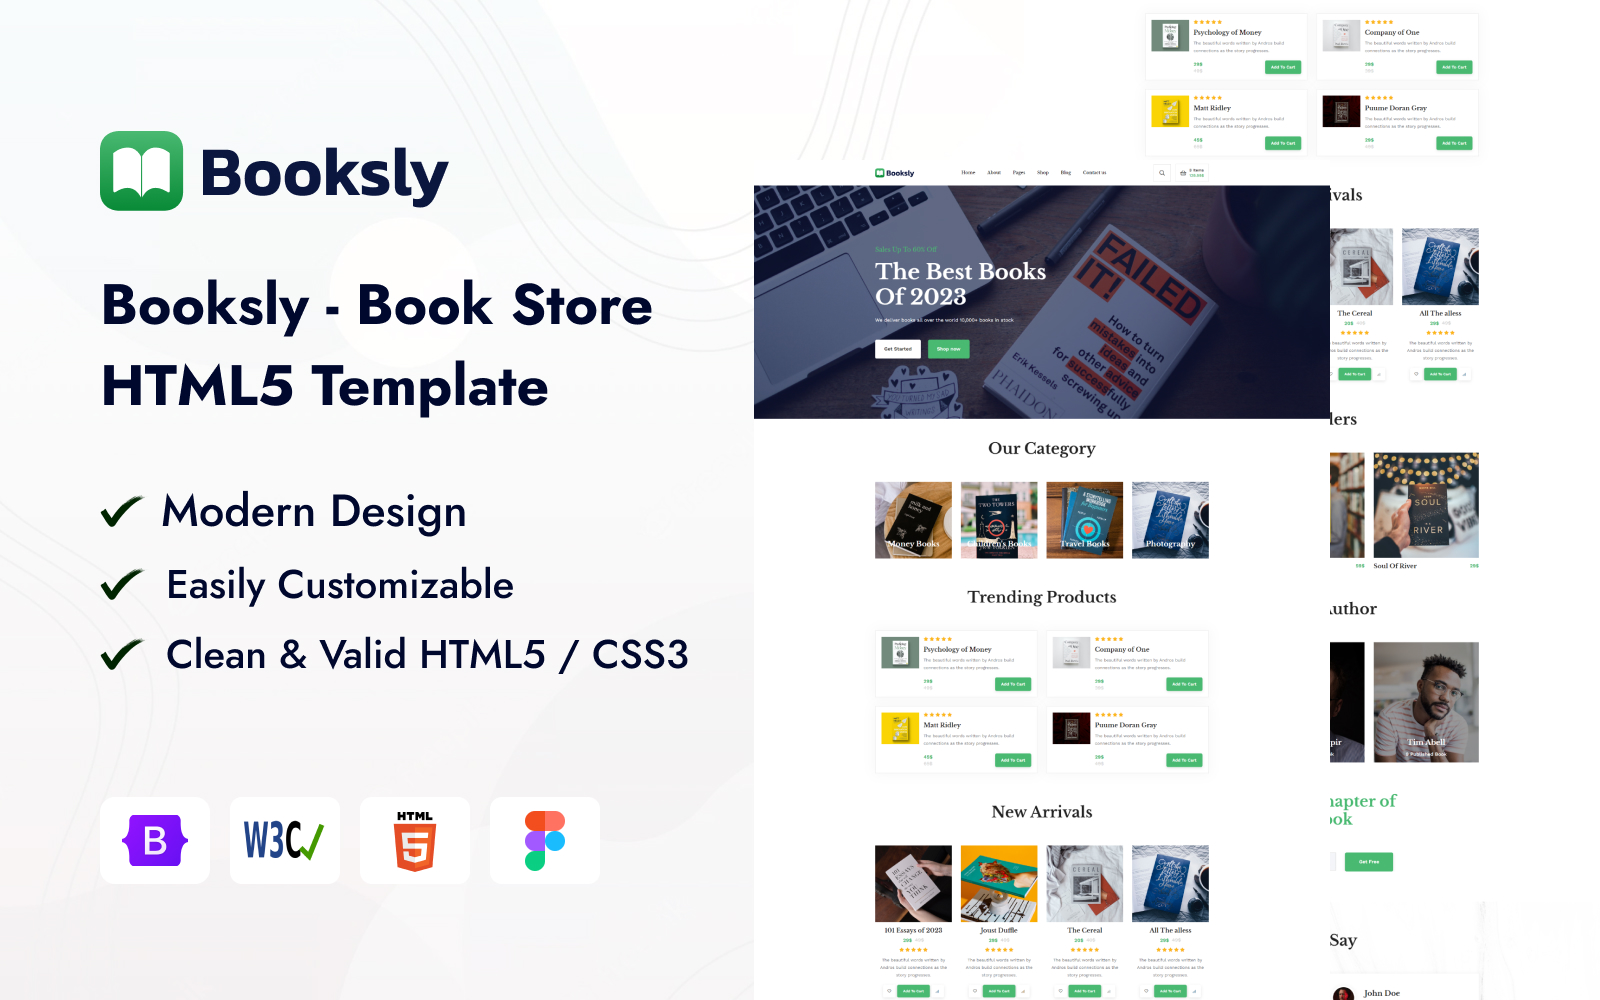 Booksly - Book Store HTML5 Template